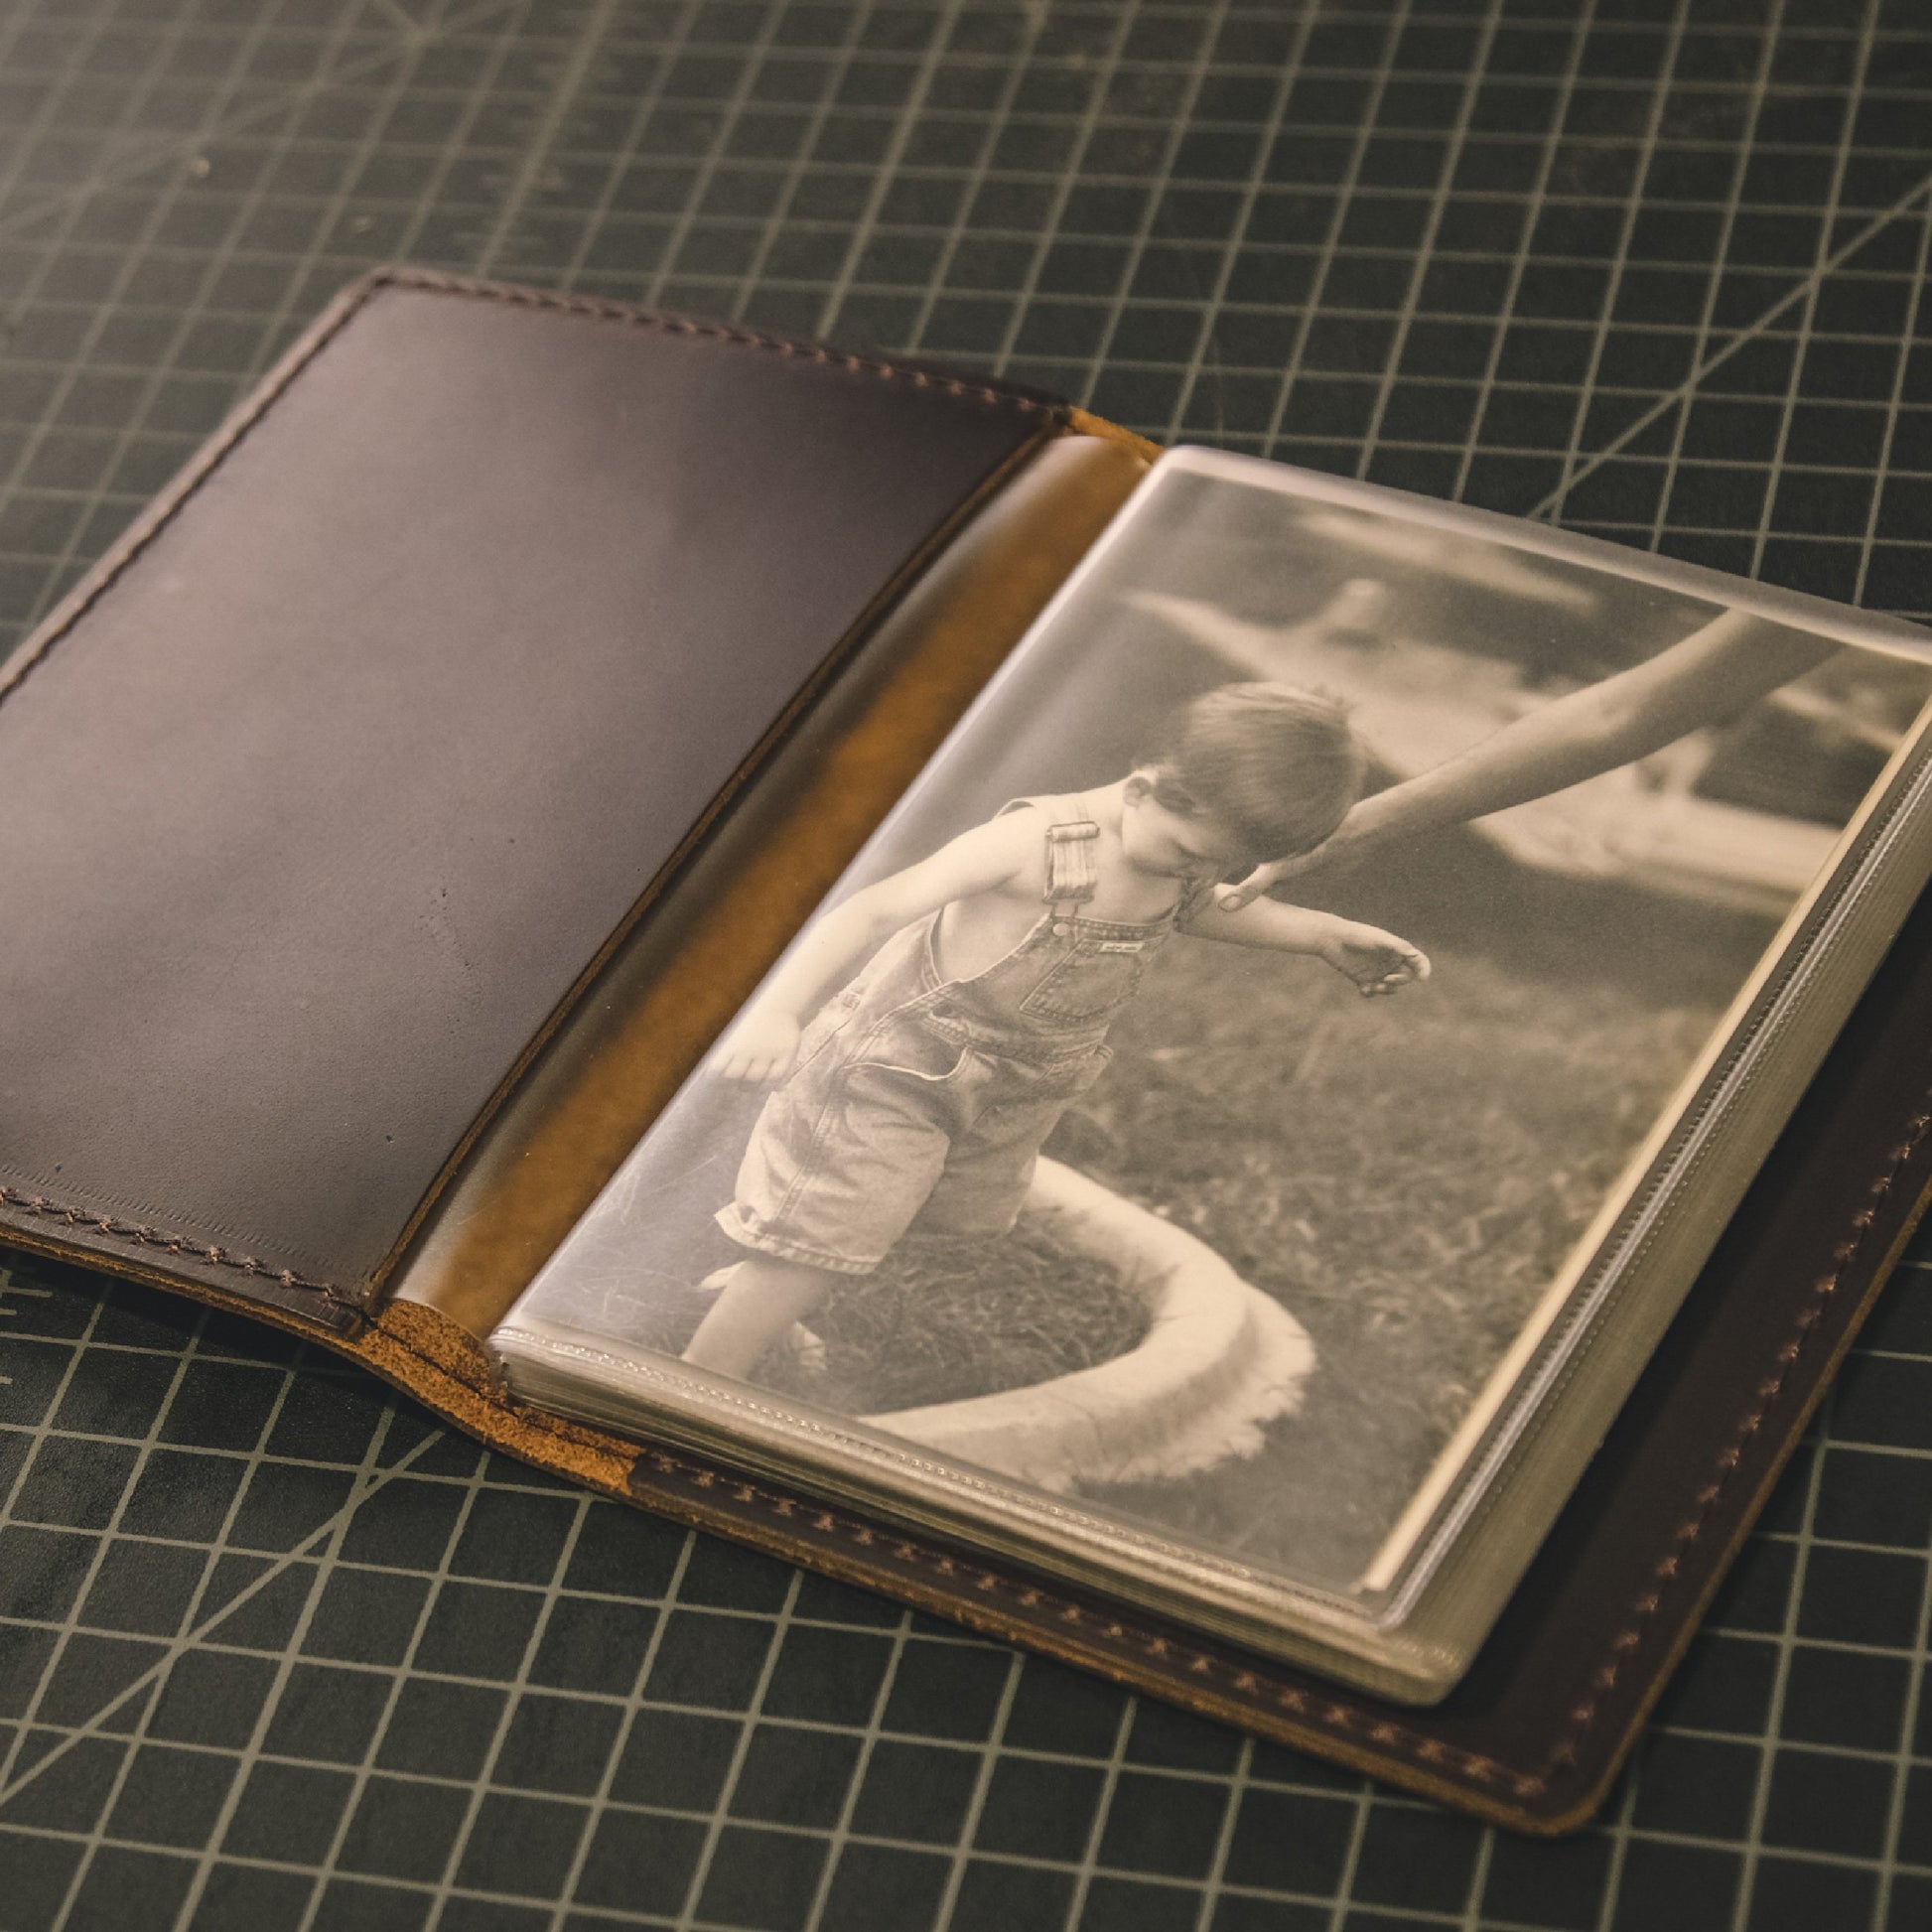 Small Photo Album 4x6 Holds 24 Ideal for Personalized Photos or Photobook (Green)